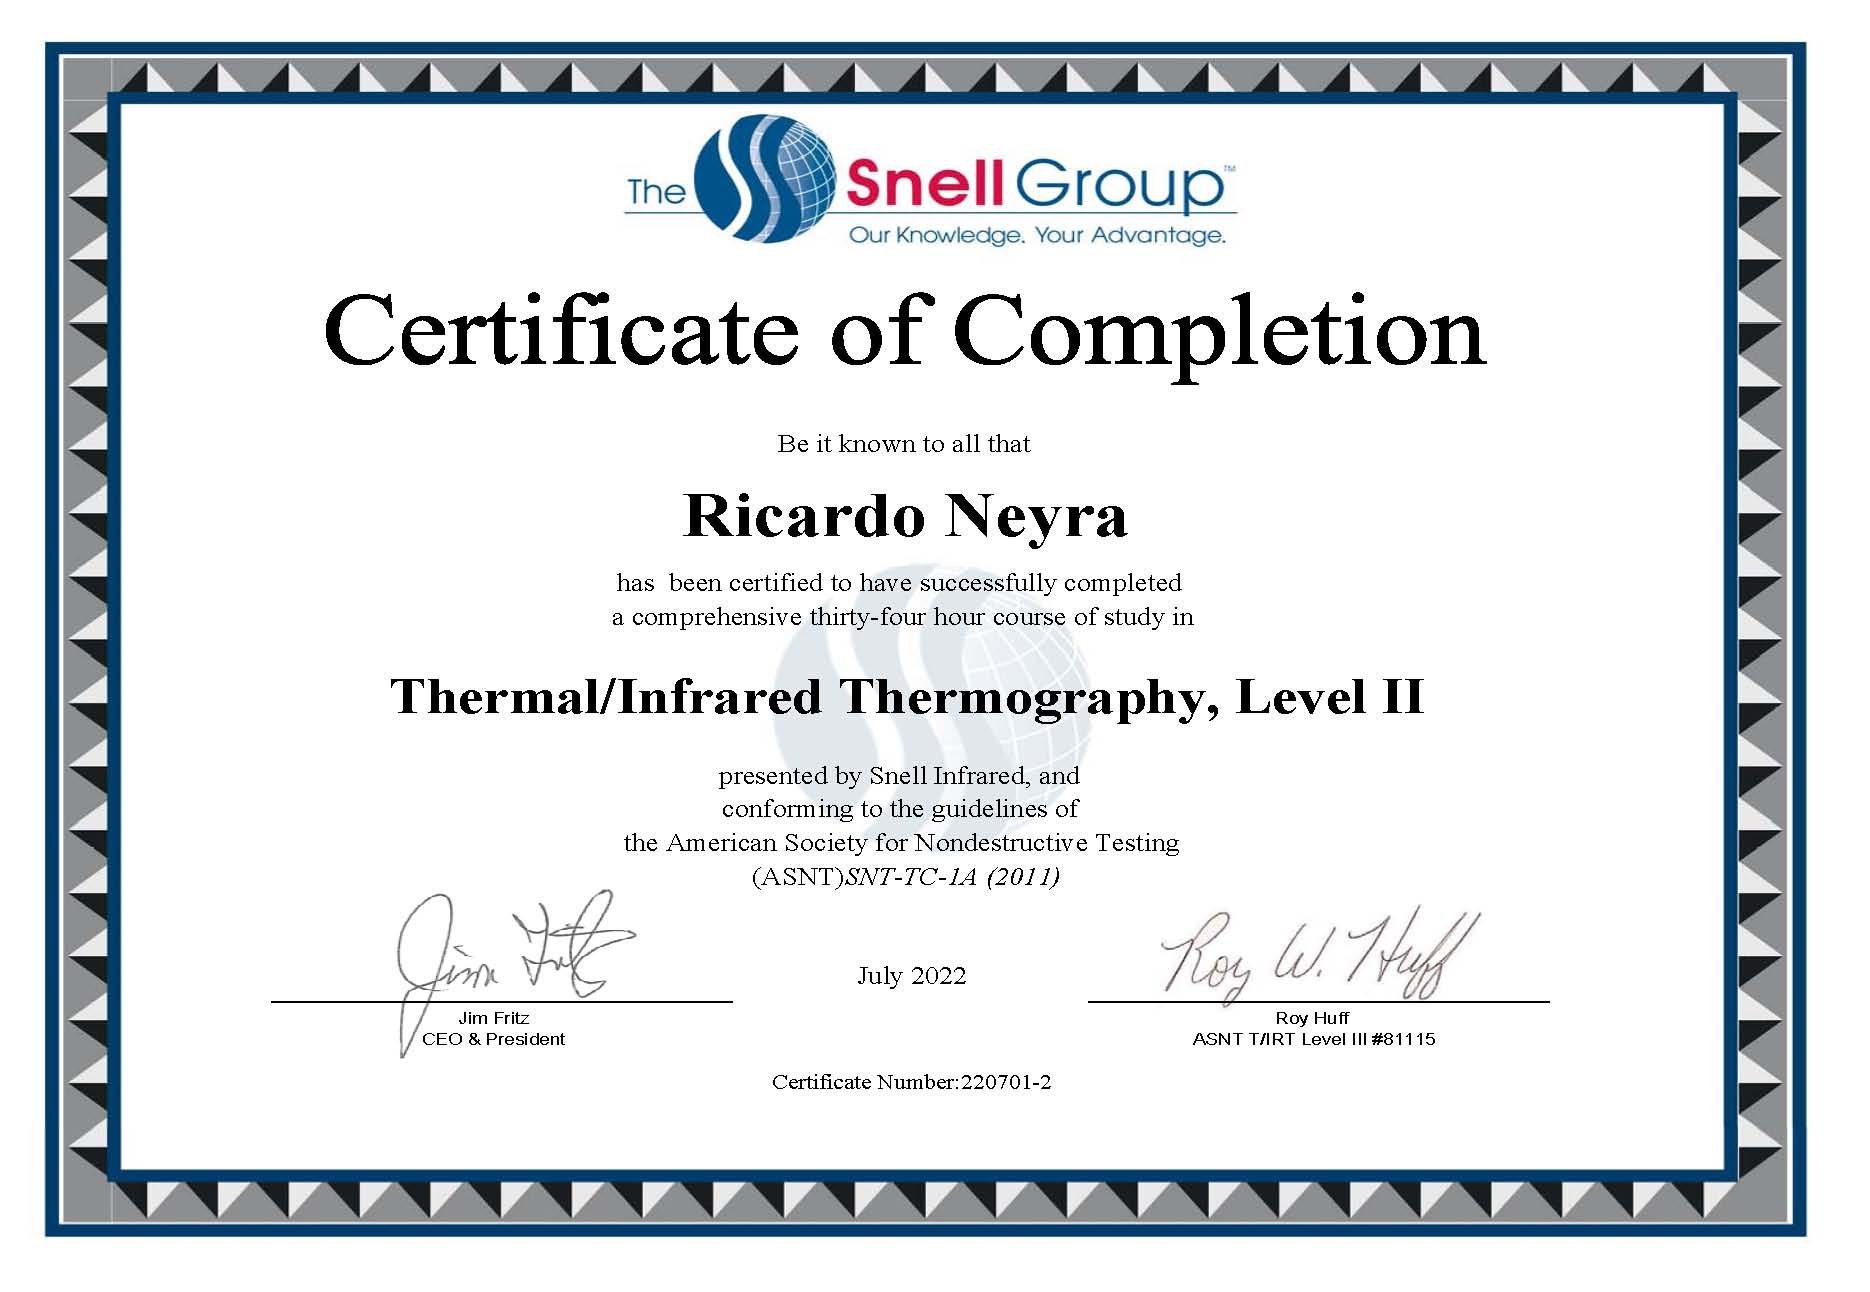 Infrared Thermography Electrical Inspection Miami Dade Thermal Imaging Scan Testing Services Certified Thermographer Level II.jpg